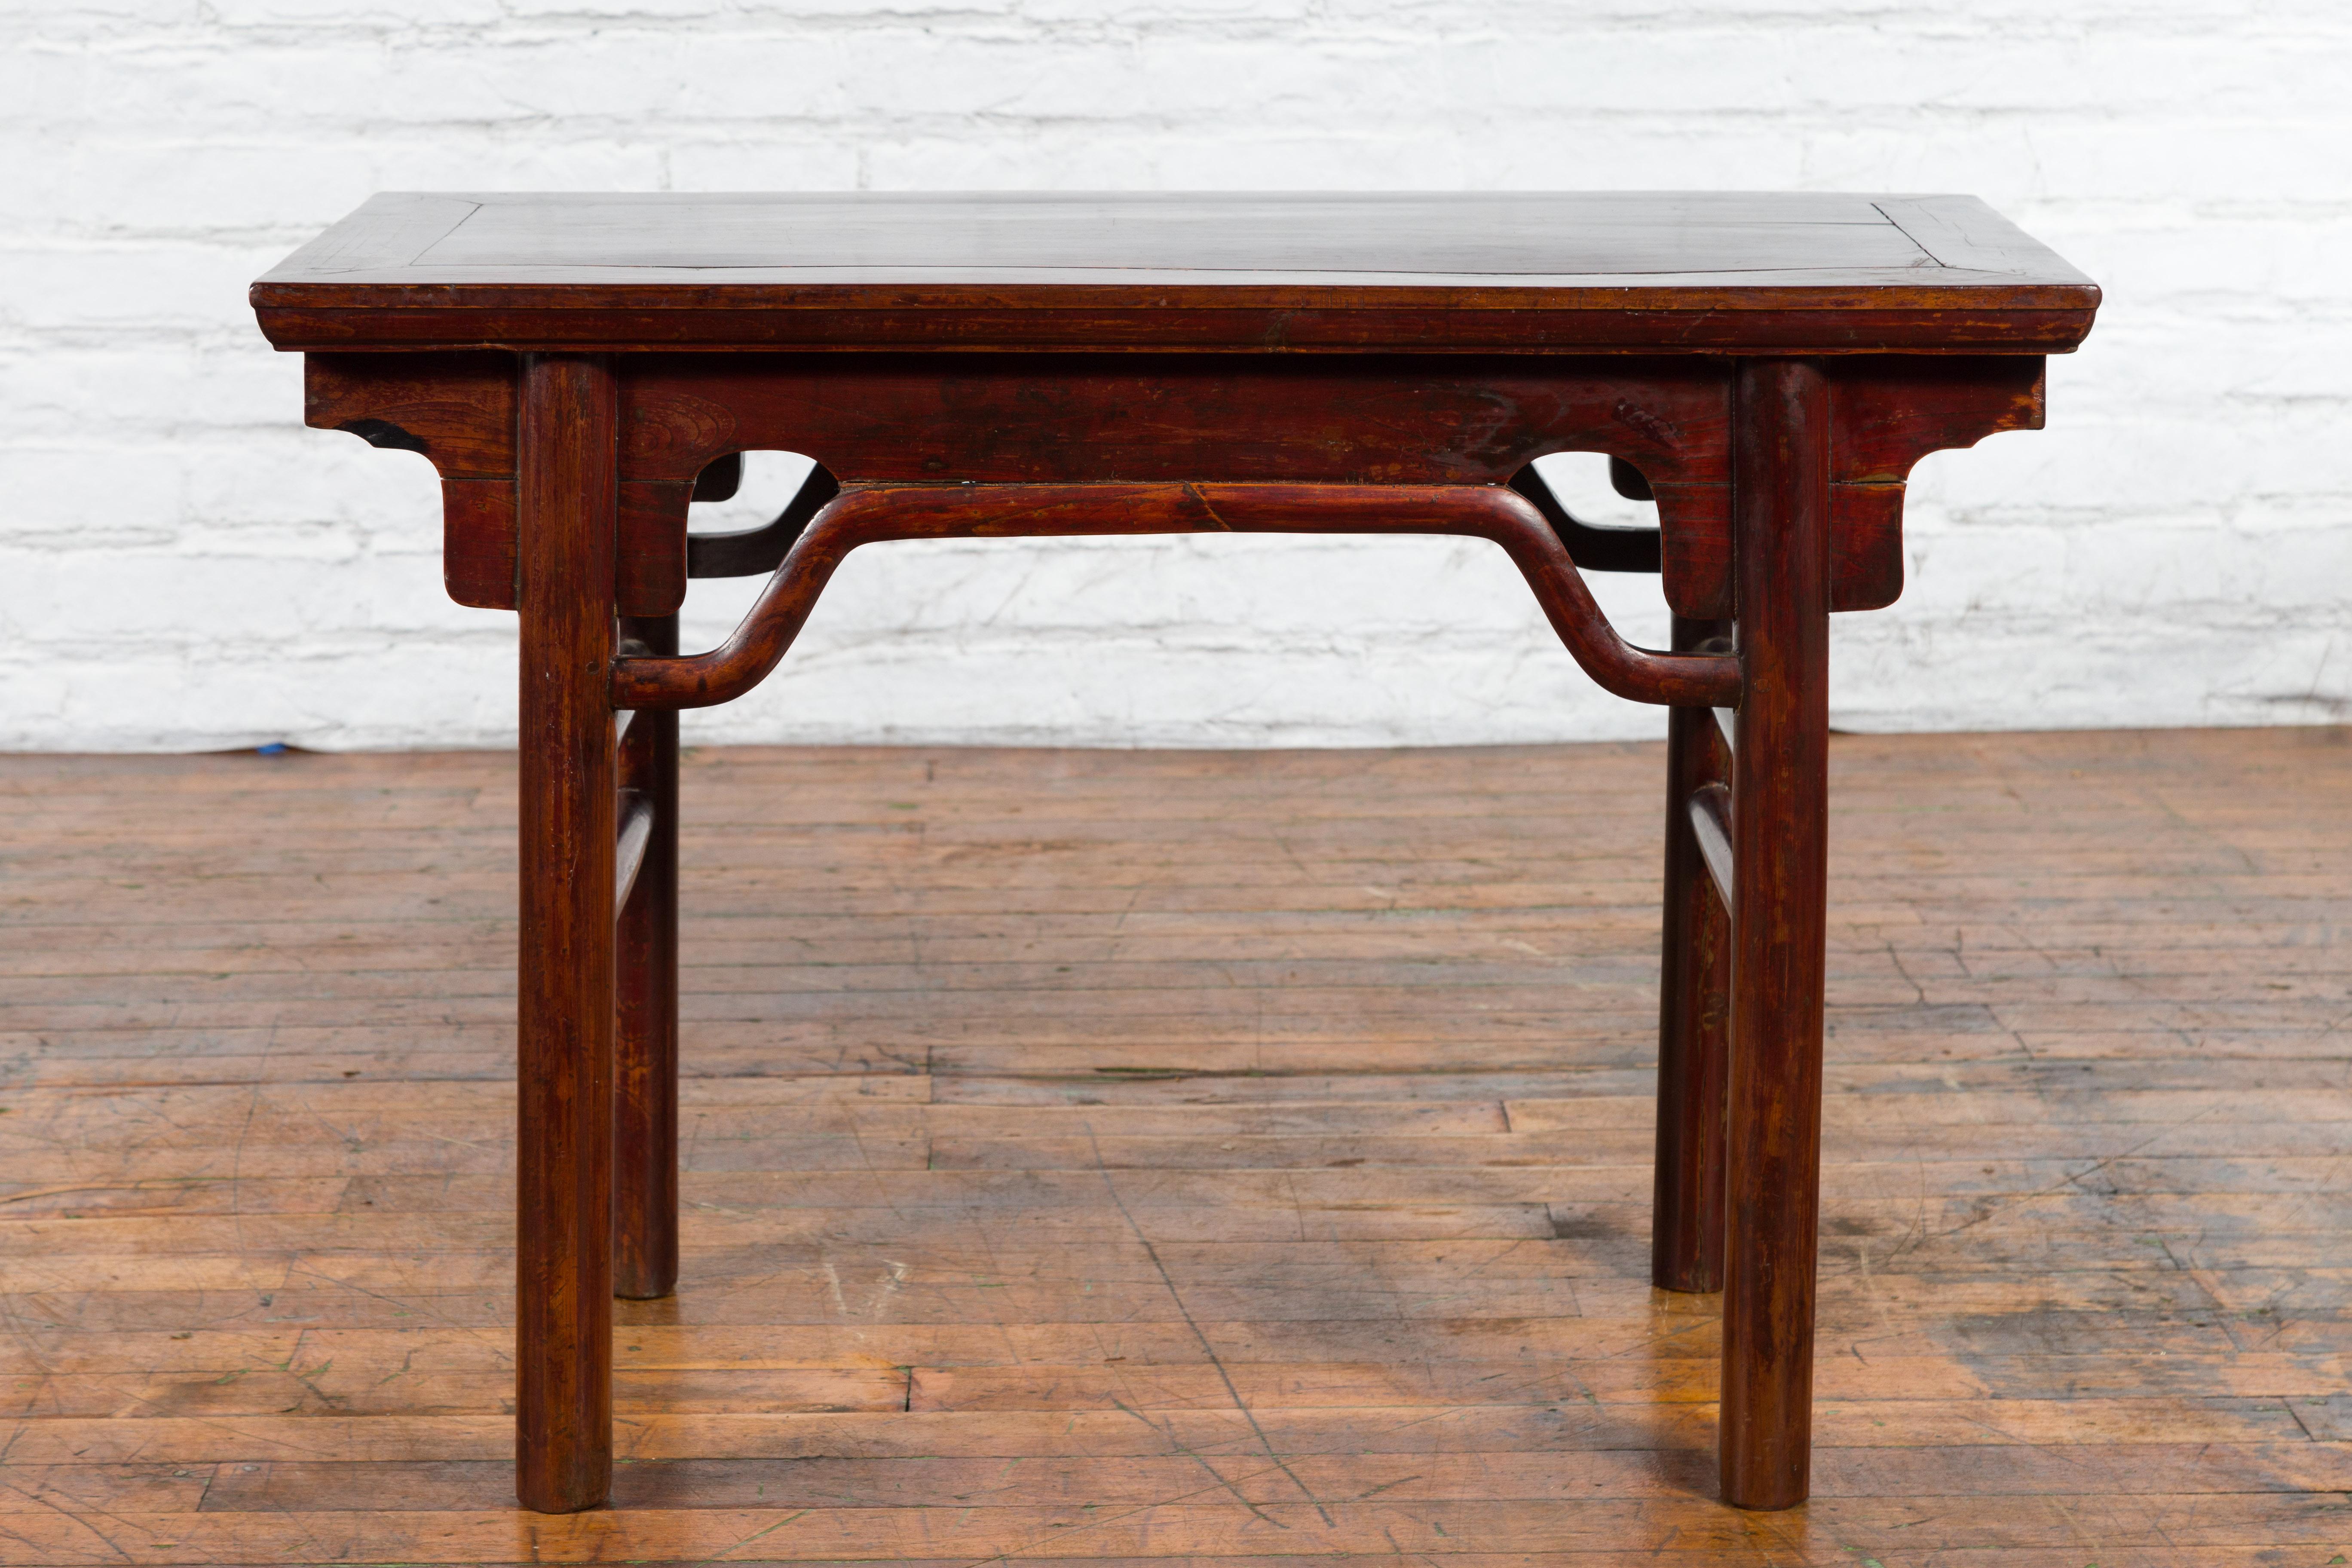 Chinese 19th Century Qing Dynasty Altar Console Table with Humpback Stretchers For Sale 7